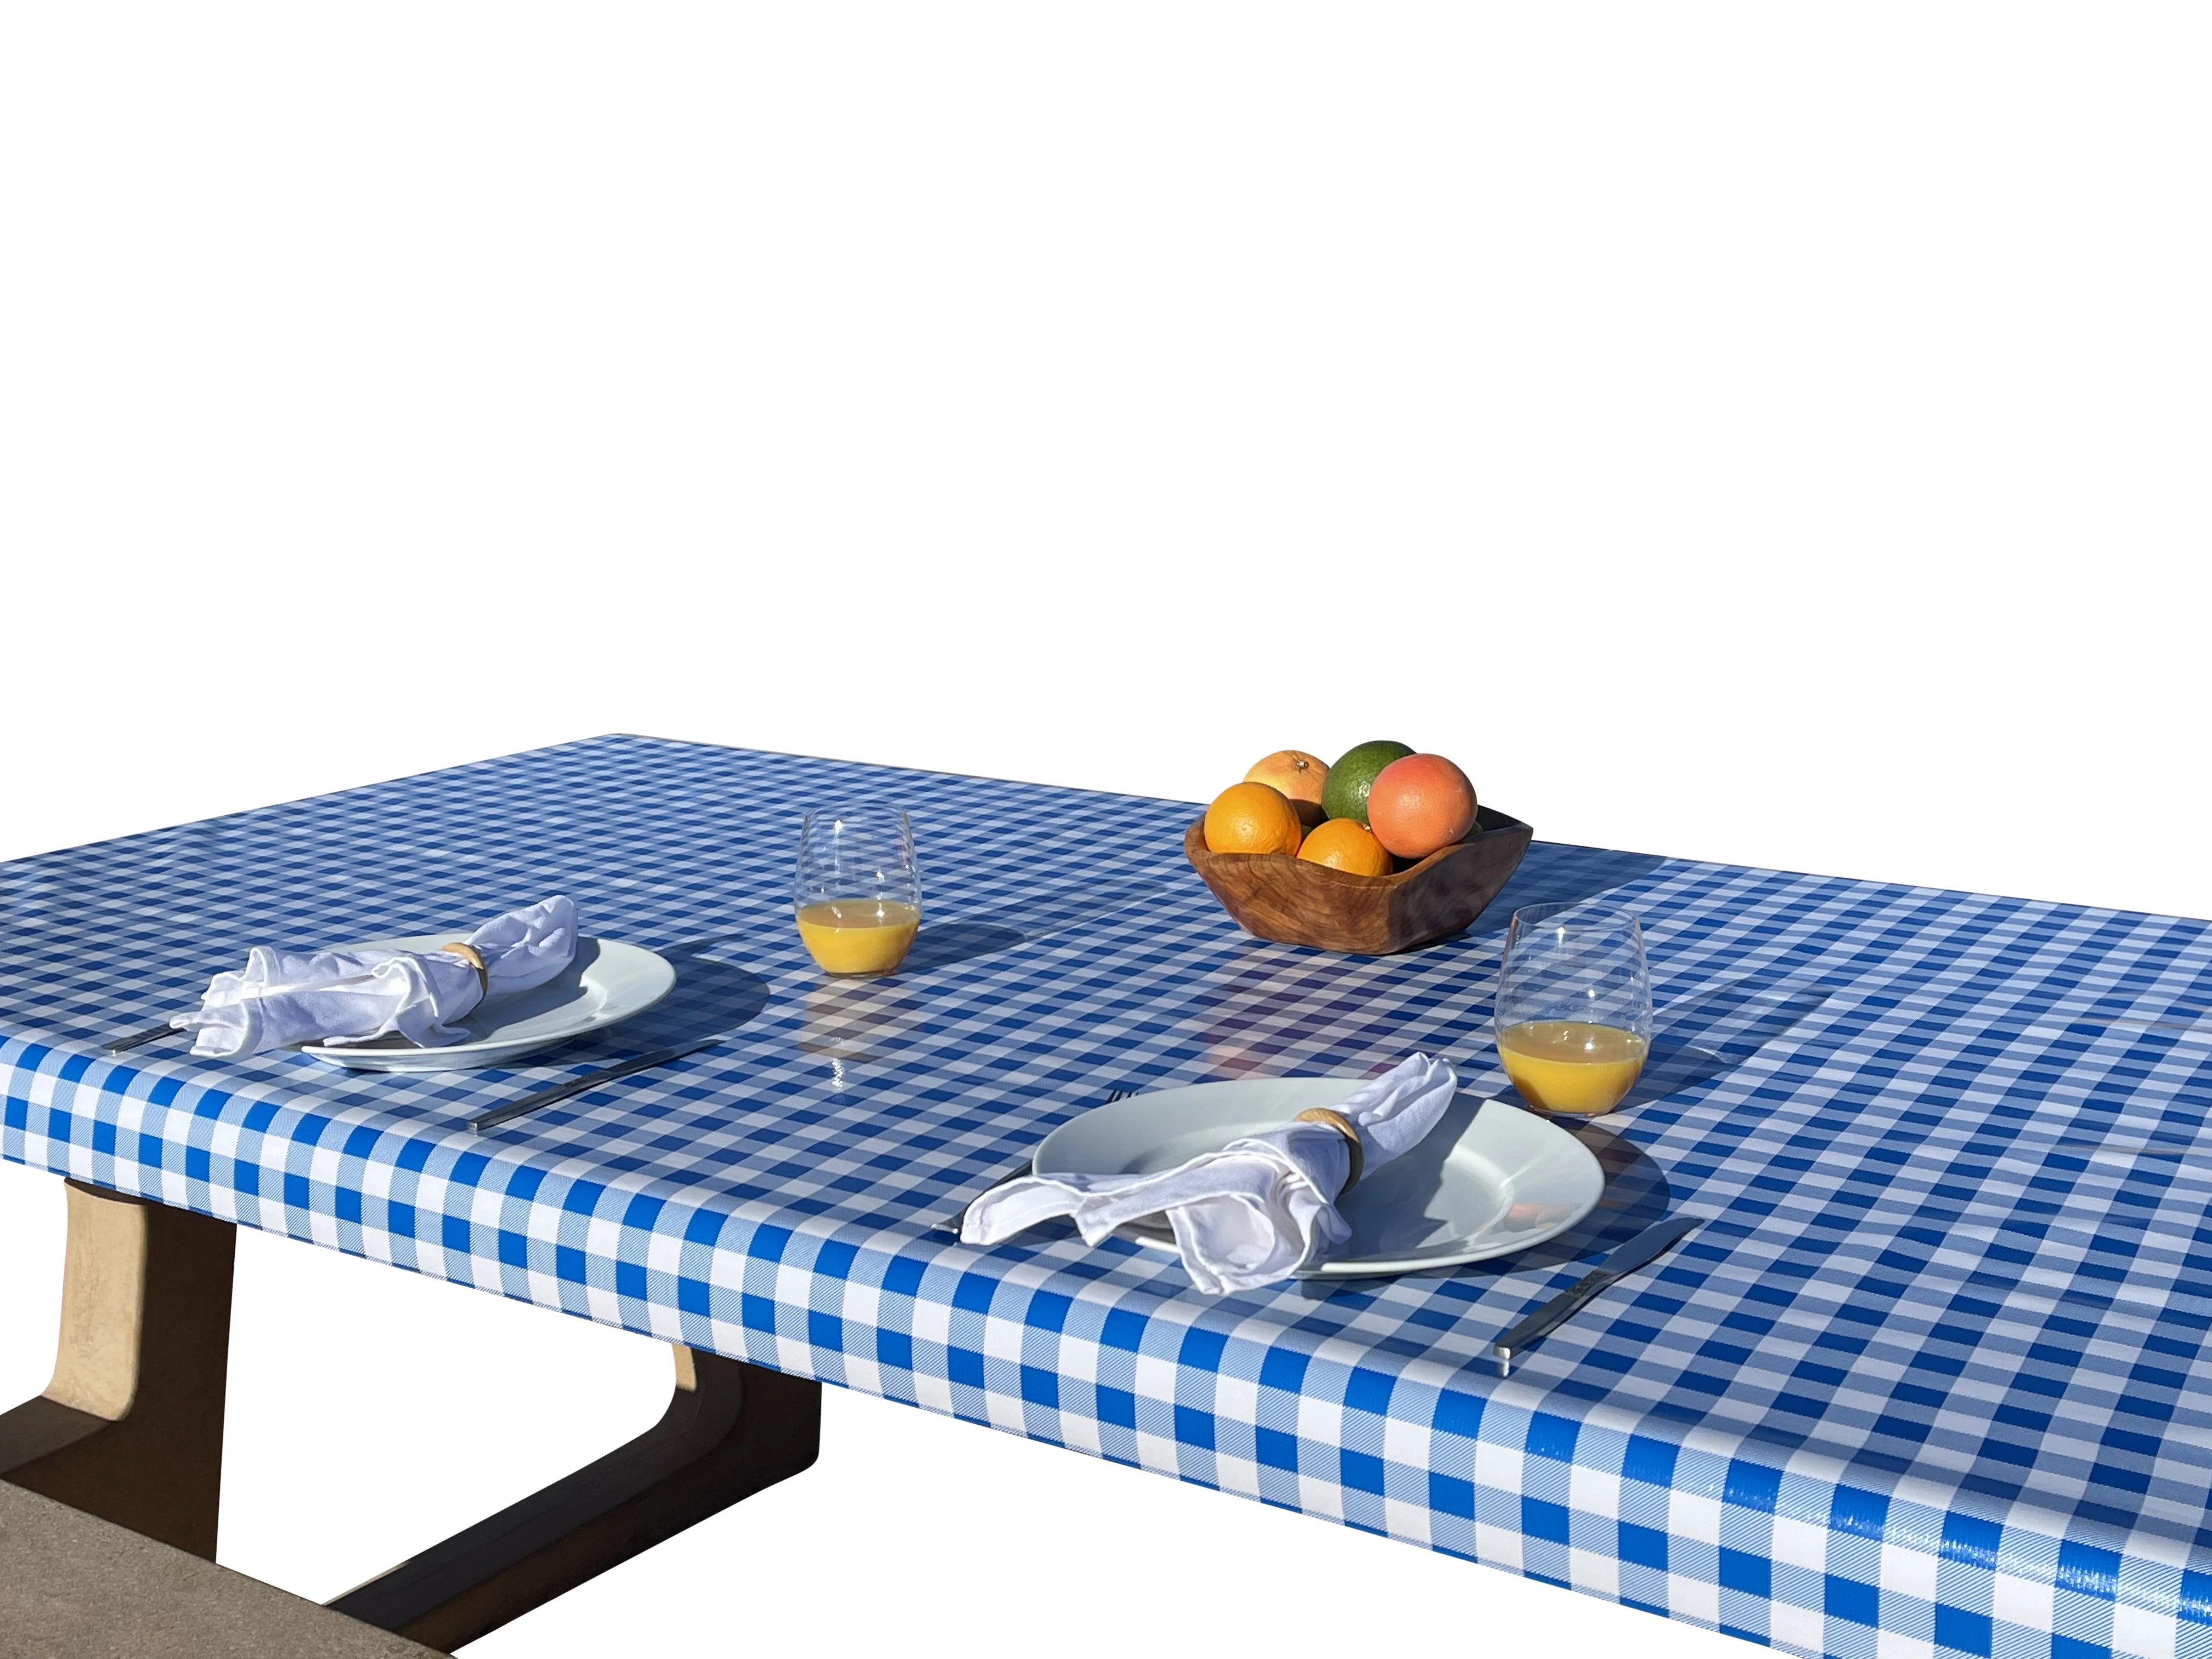 Blue and White Checkered waterproof, durable outdoor tablecloths that fit almost any picnic table you will encounter camping